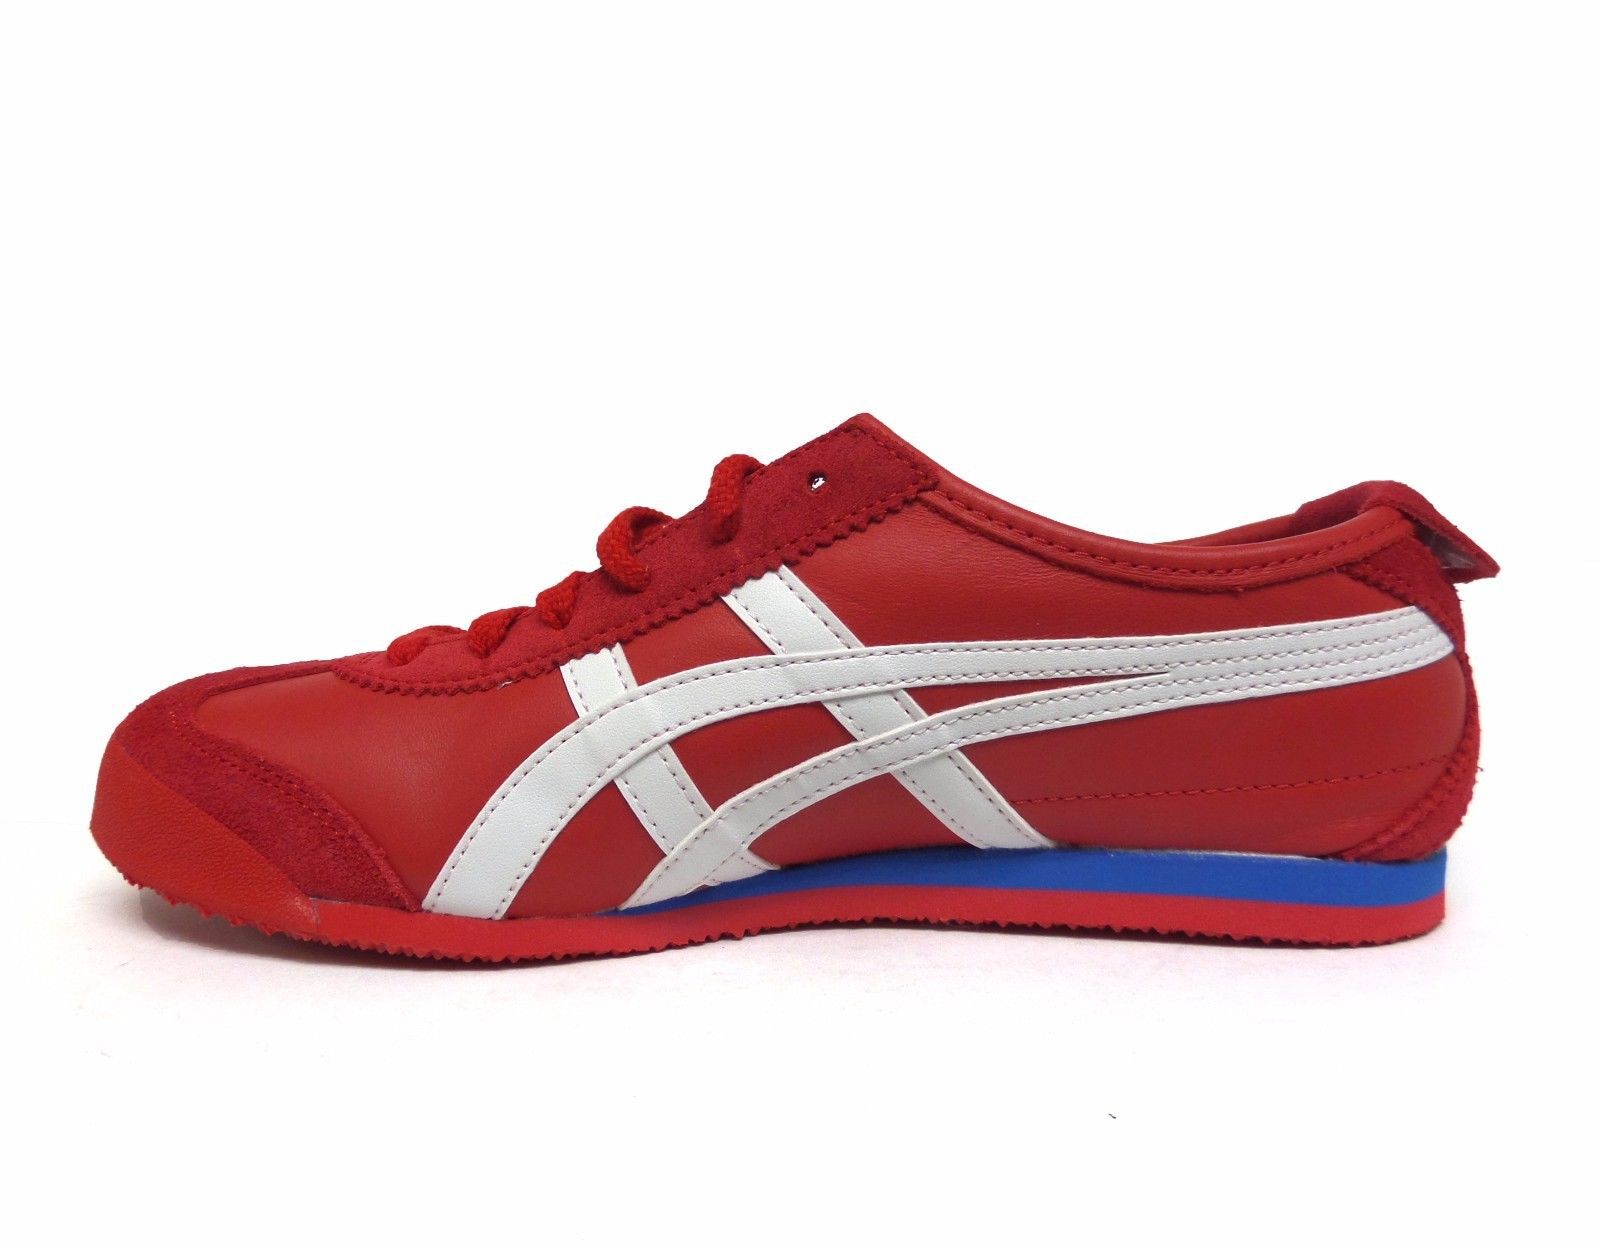 Asics Tiger Mexico 66 Red Running Shoes - Buy Asics Tiger Mexico 66 Red ...